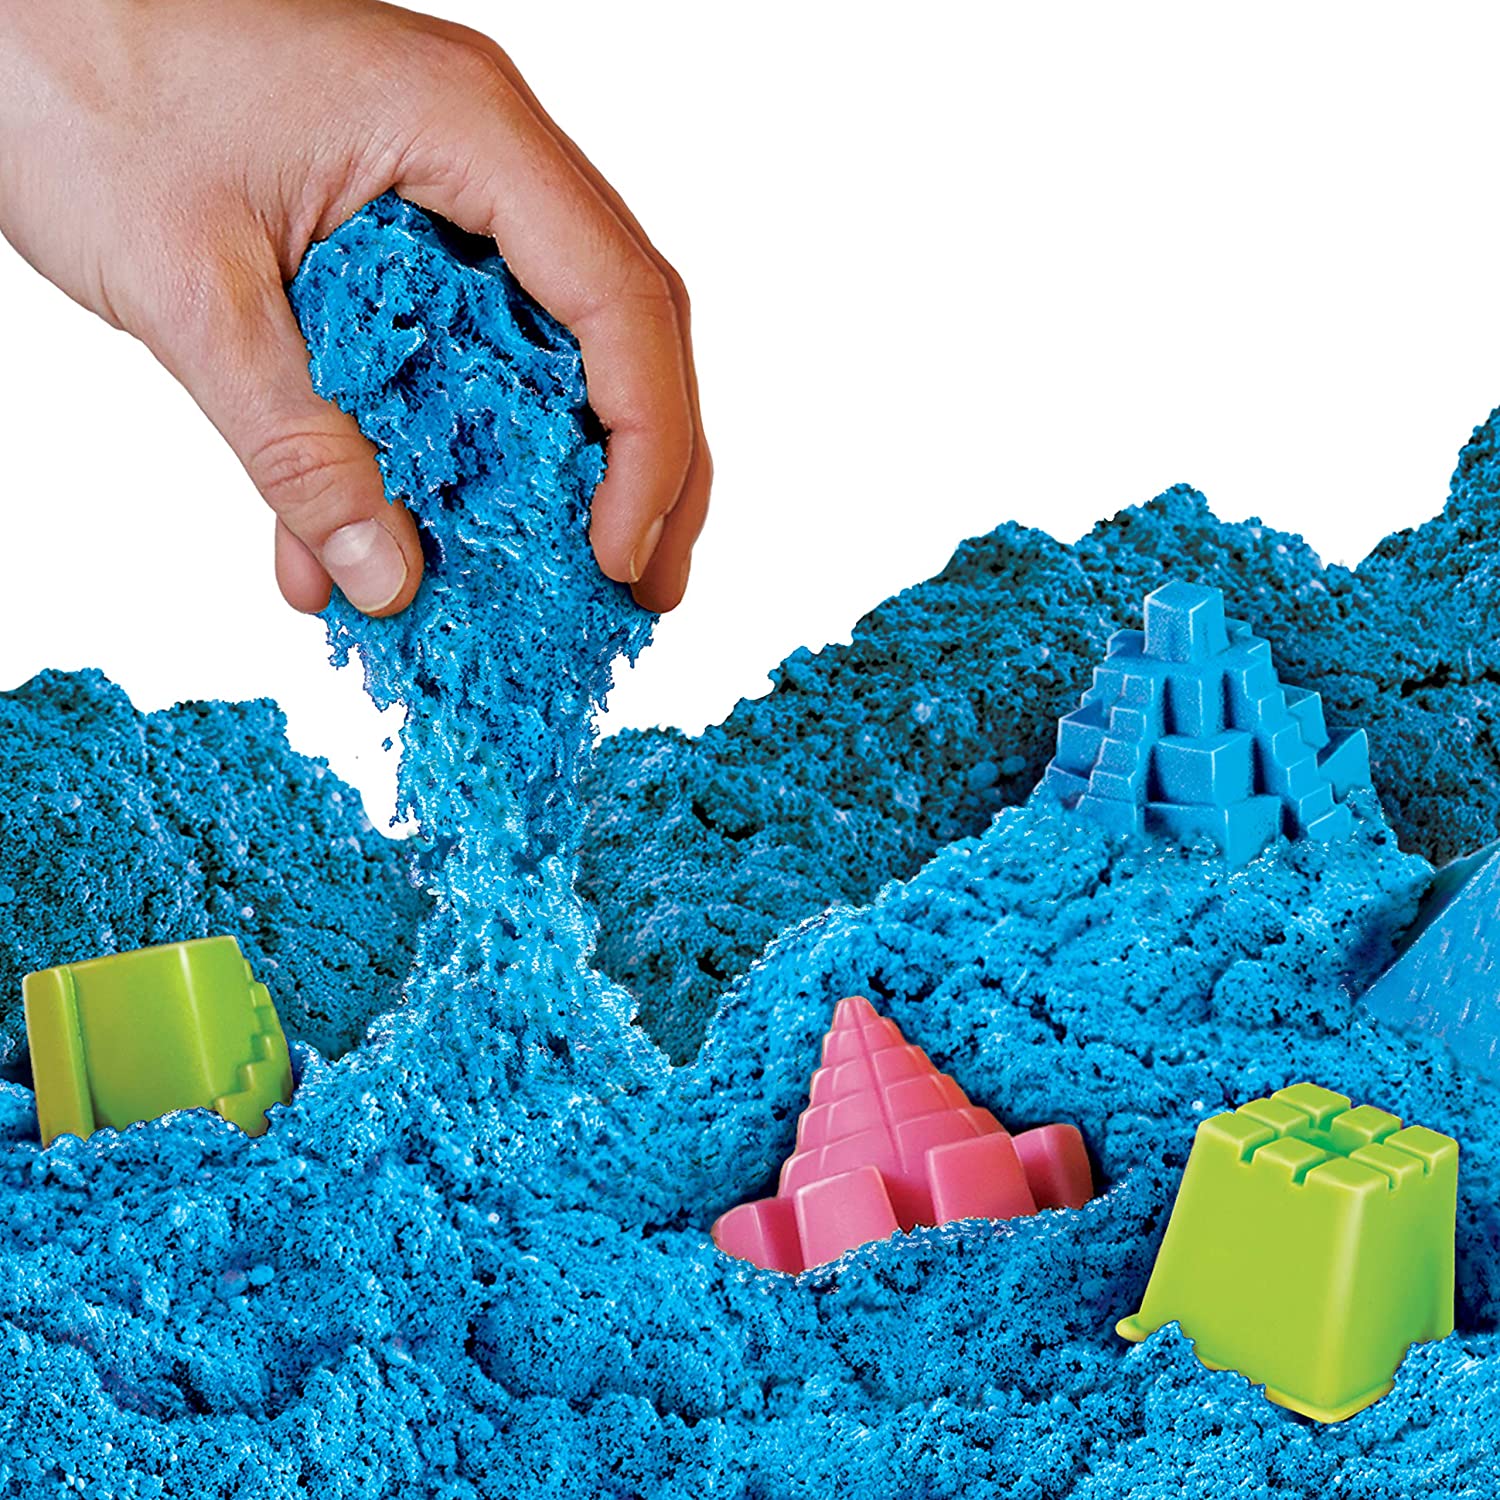 NATIONAL GEOGRAPHIC Non-Toxic Kinetic Sand For Kids